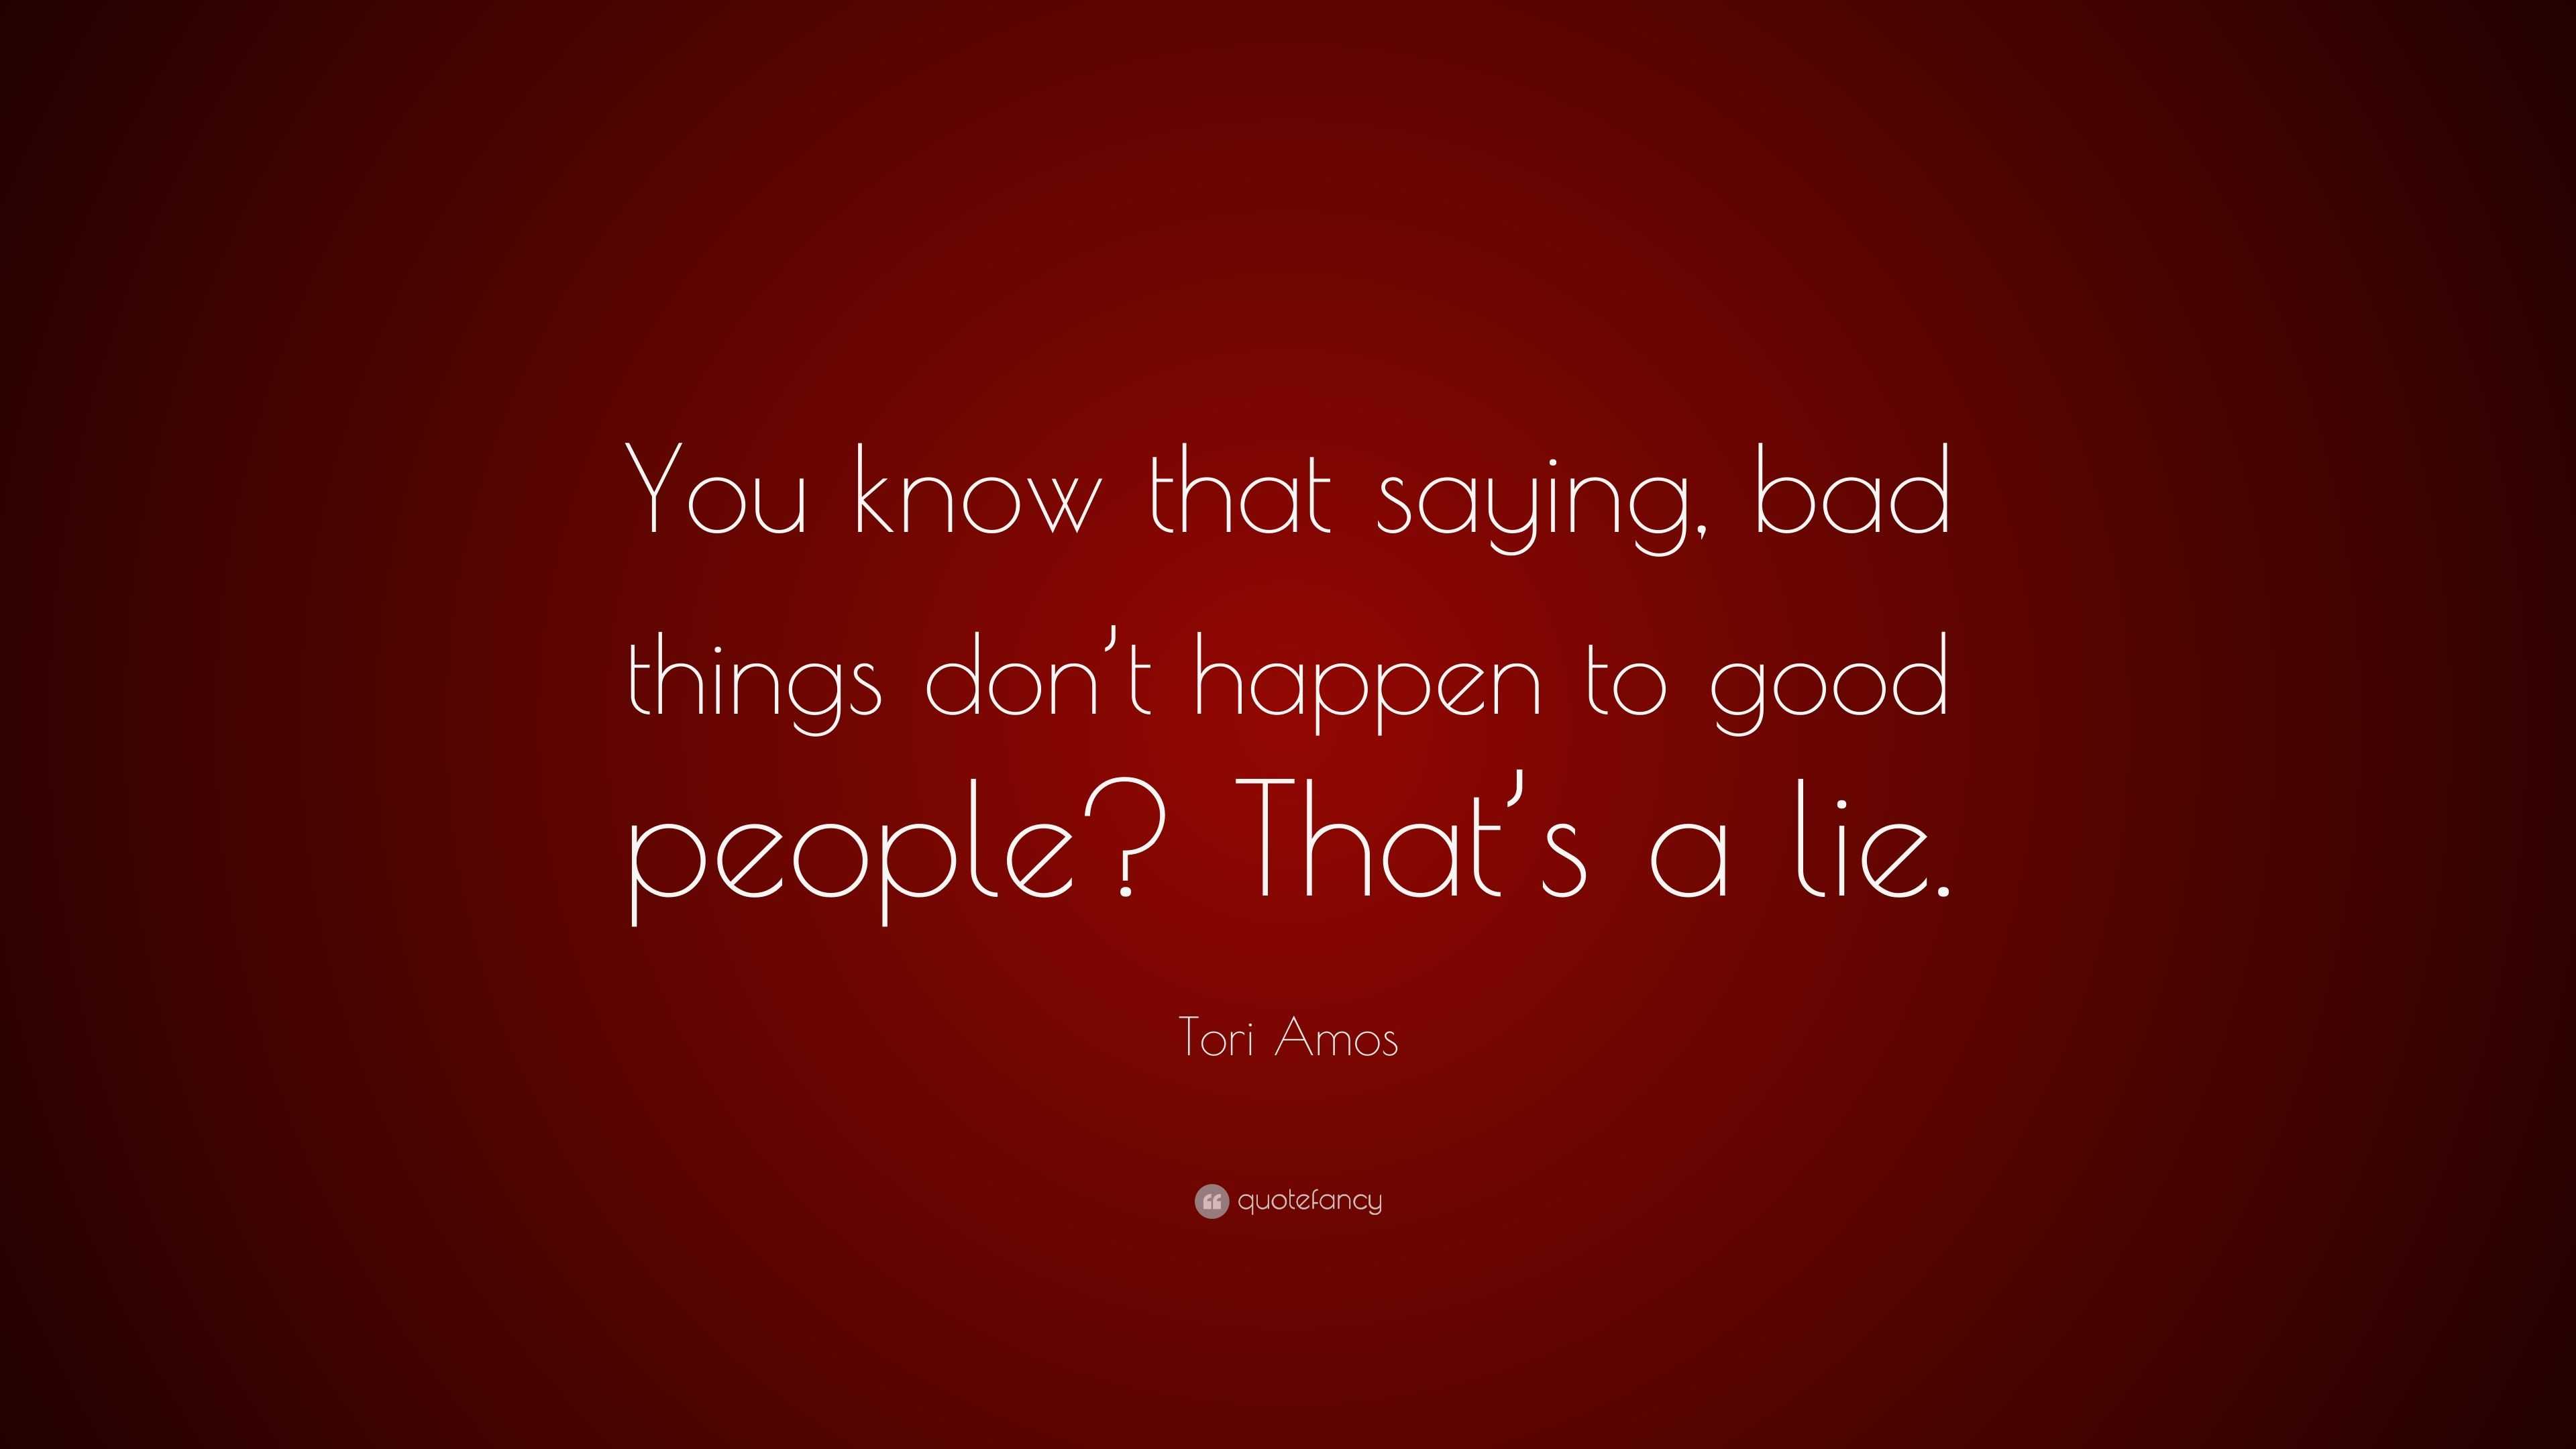 Tori Amos Quote: “You know that saying, bad things don’t happen to good ...